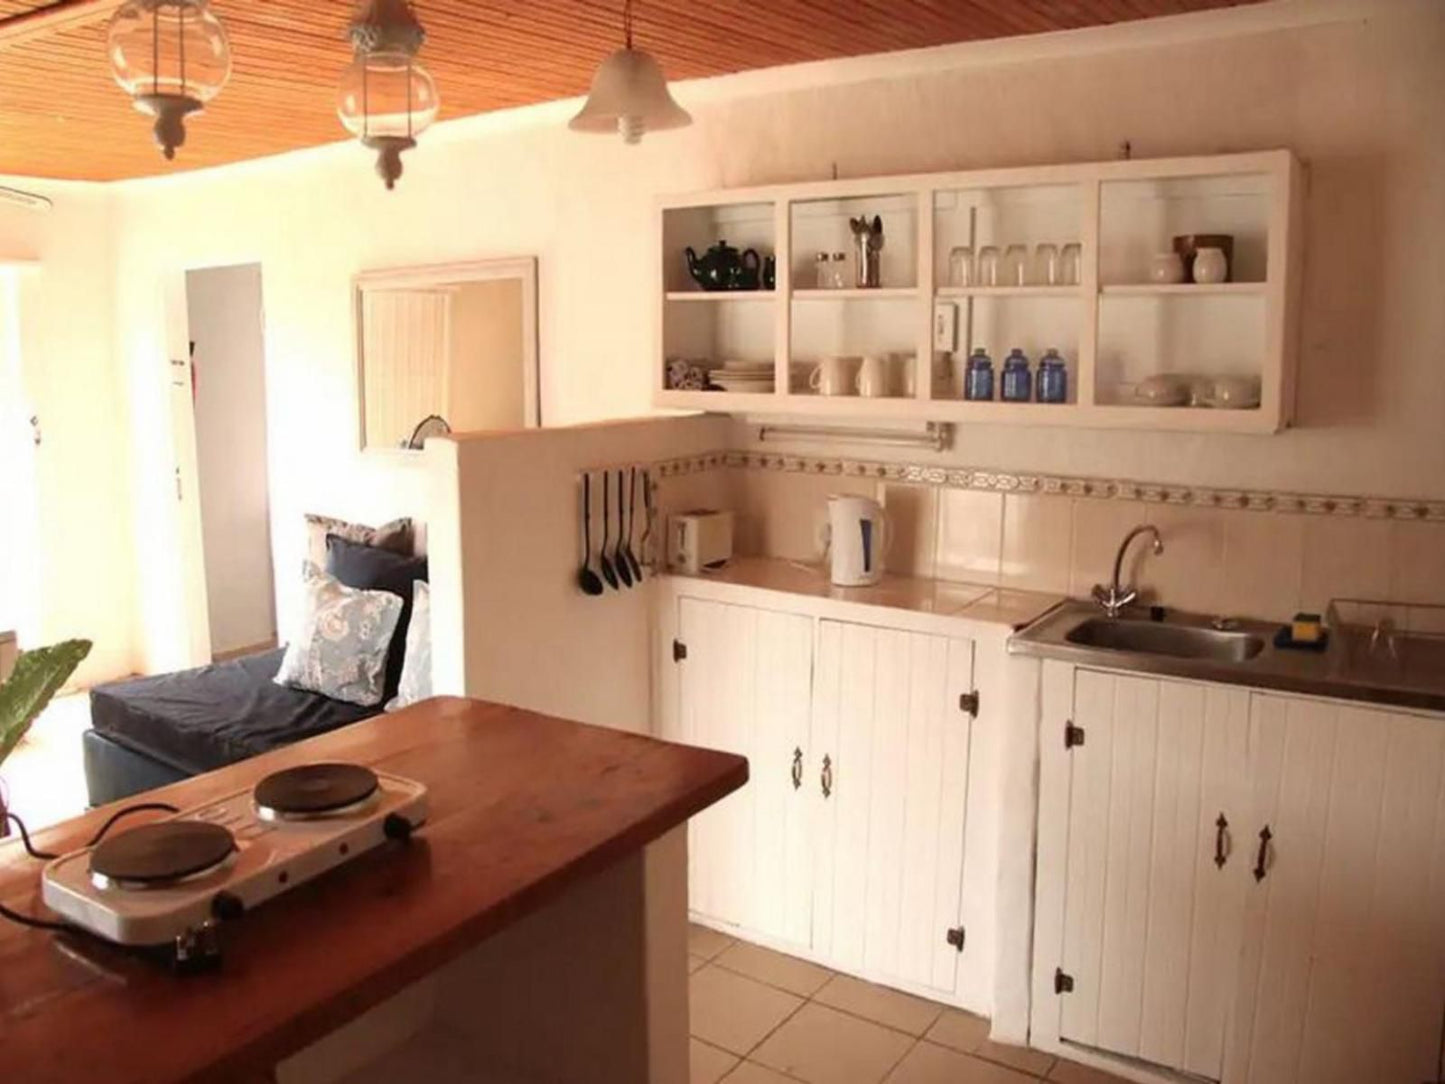 The Little Cottages Merrivale Howick Kwazulu Natal South Africa Colorful, Kitchen